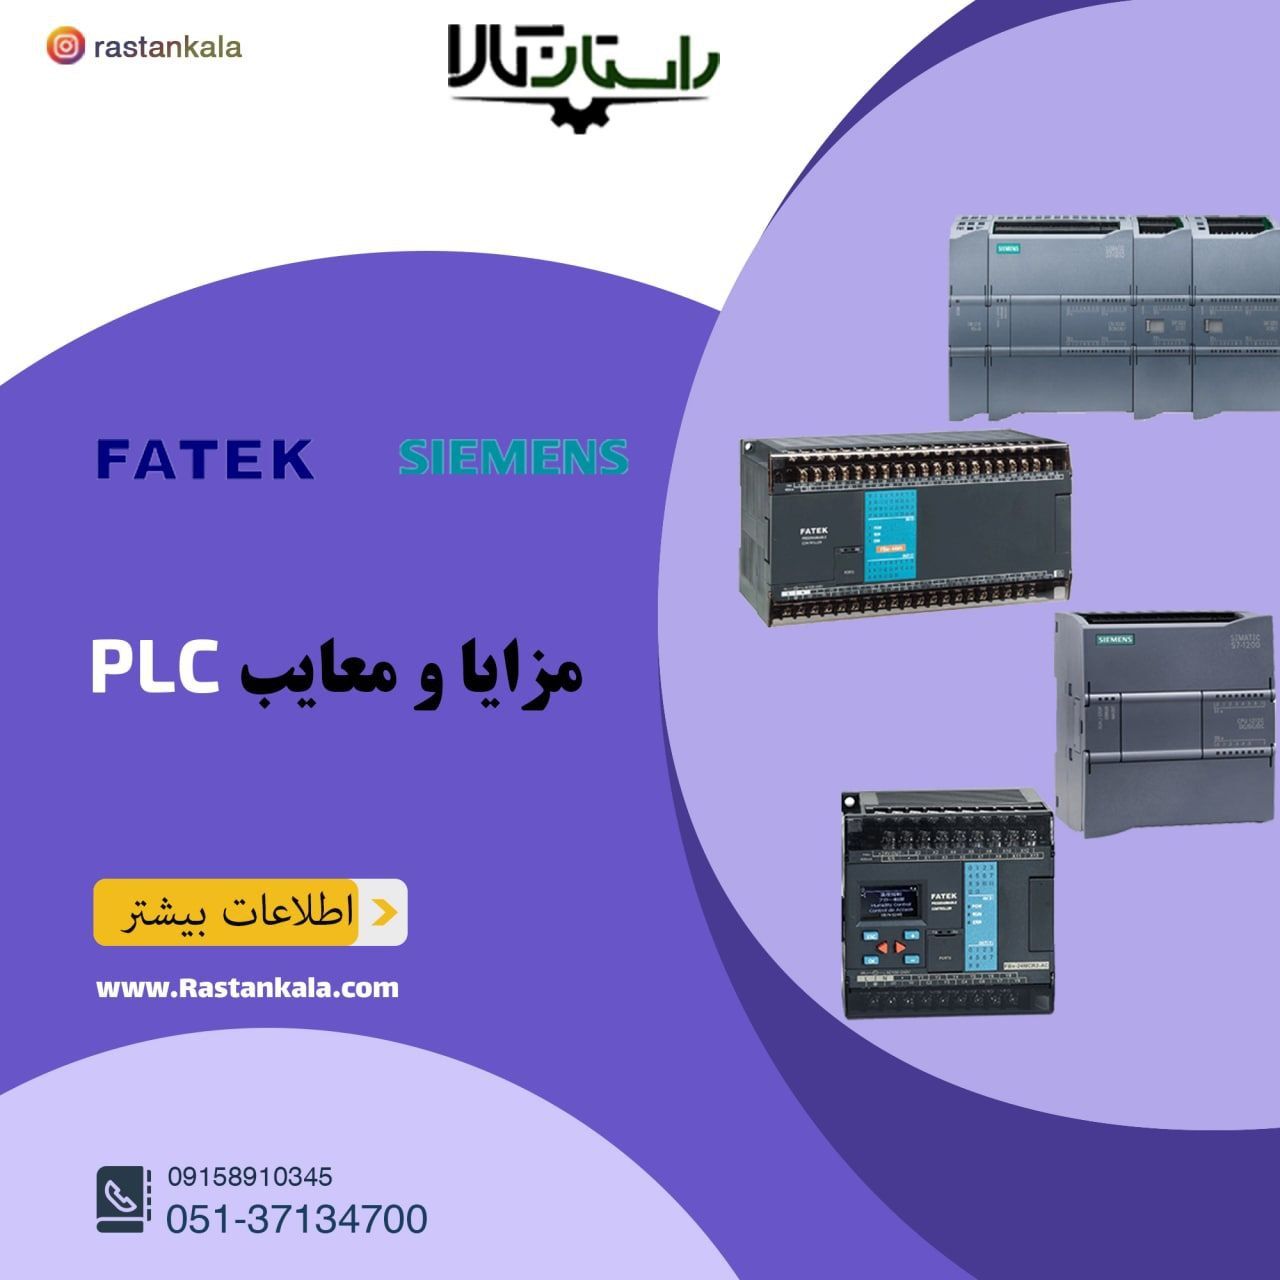 product category what is PLC 5 راستان کالا